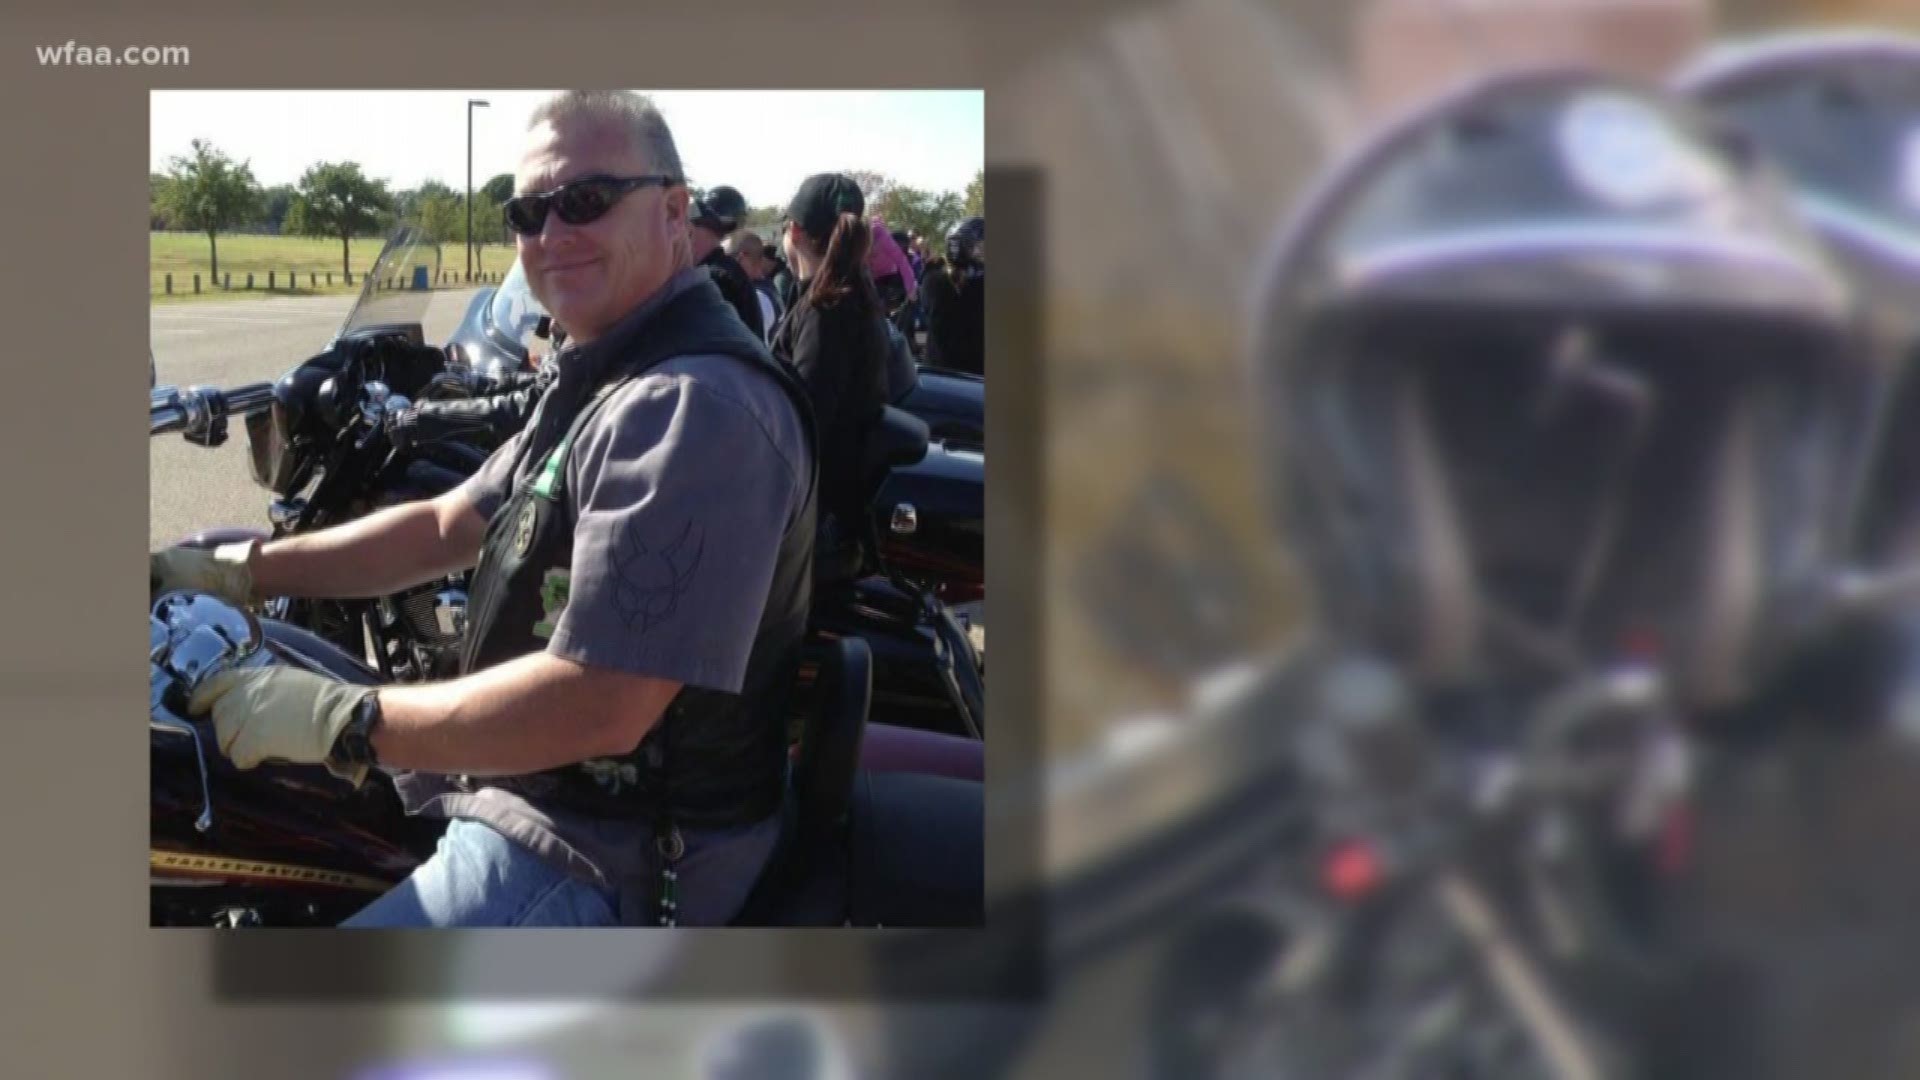 Cpl. Earl Jamie Givens died Saturday morning after he was hit on his motorcycle near I-20 and Bonnie View.